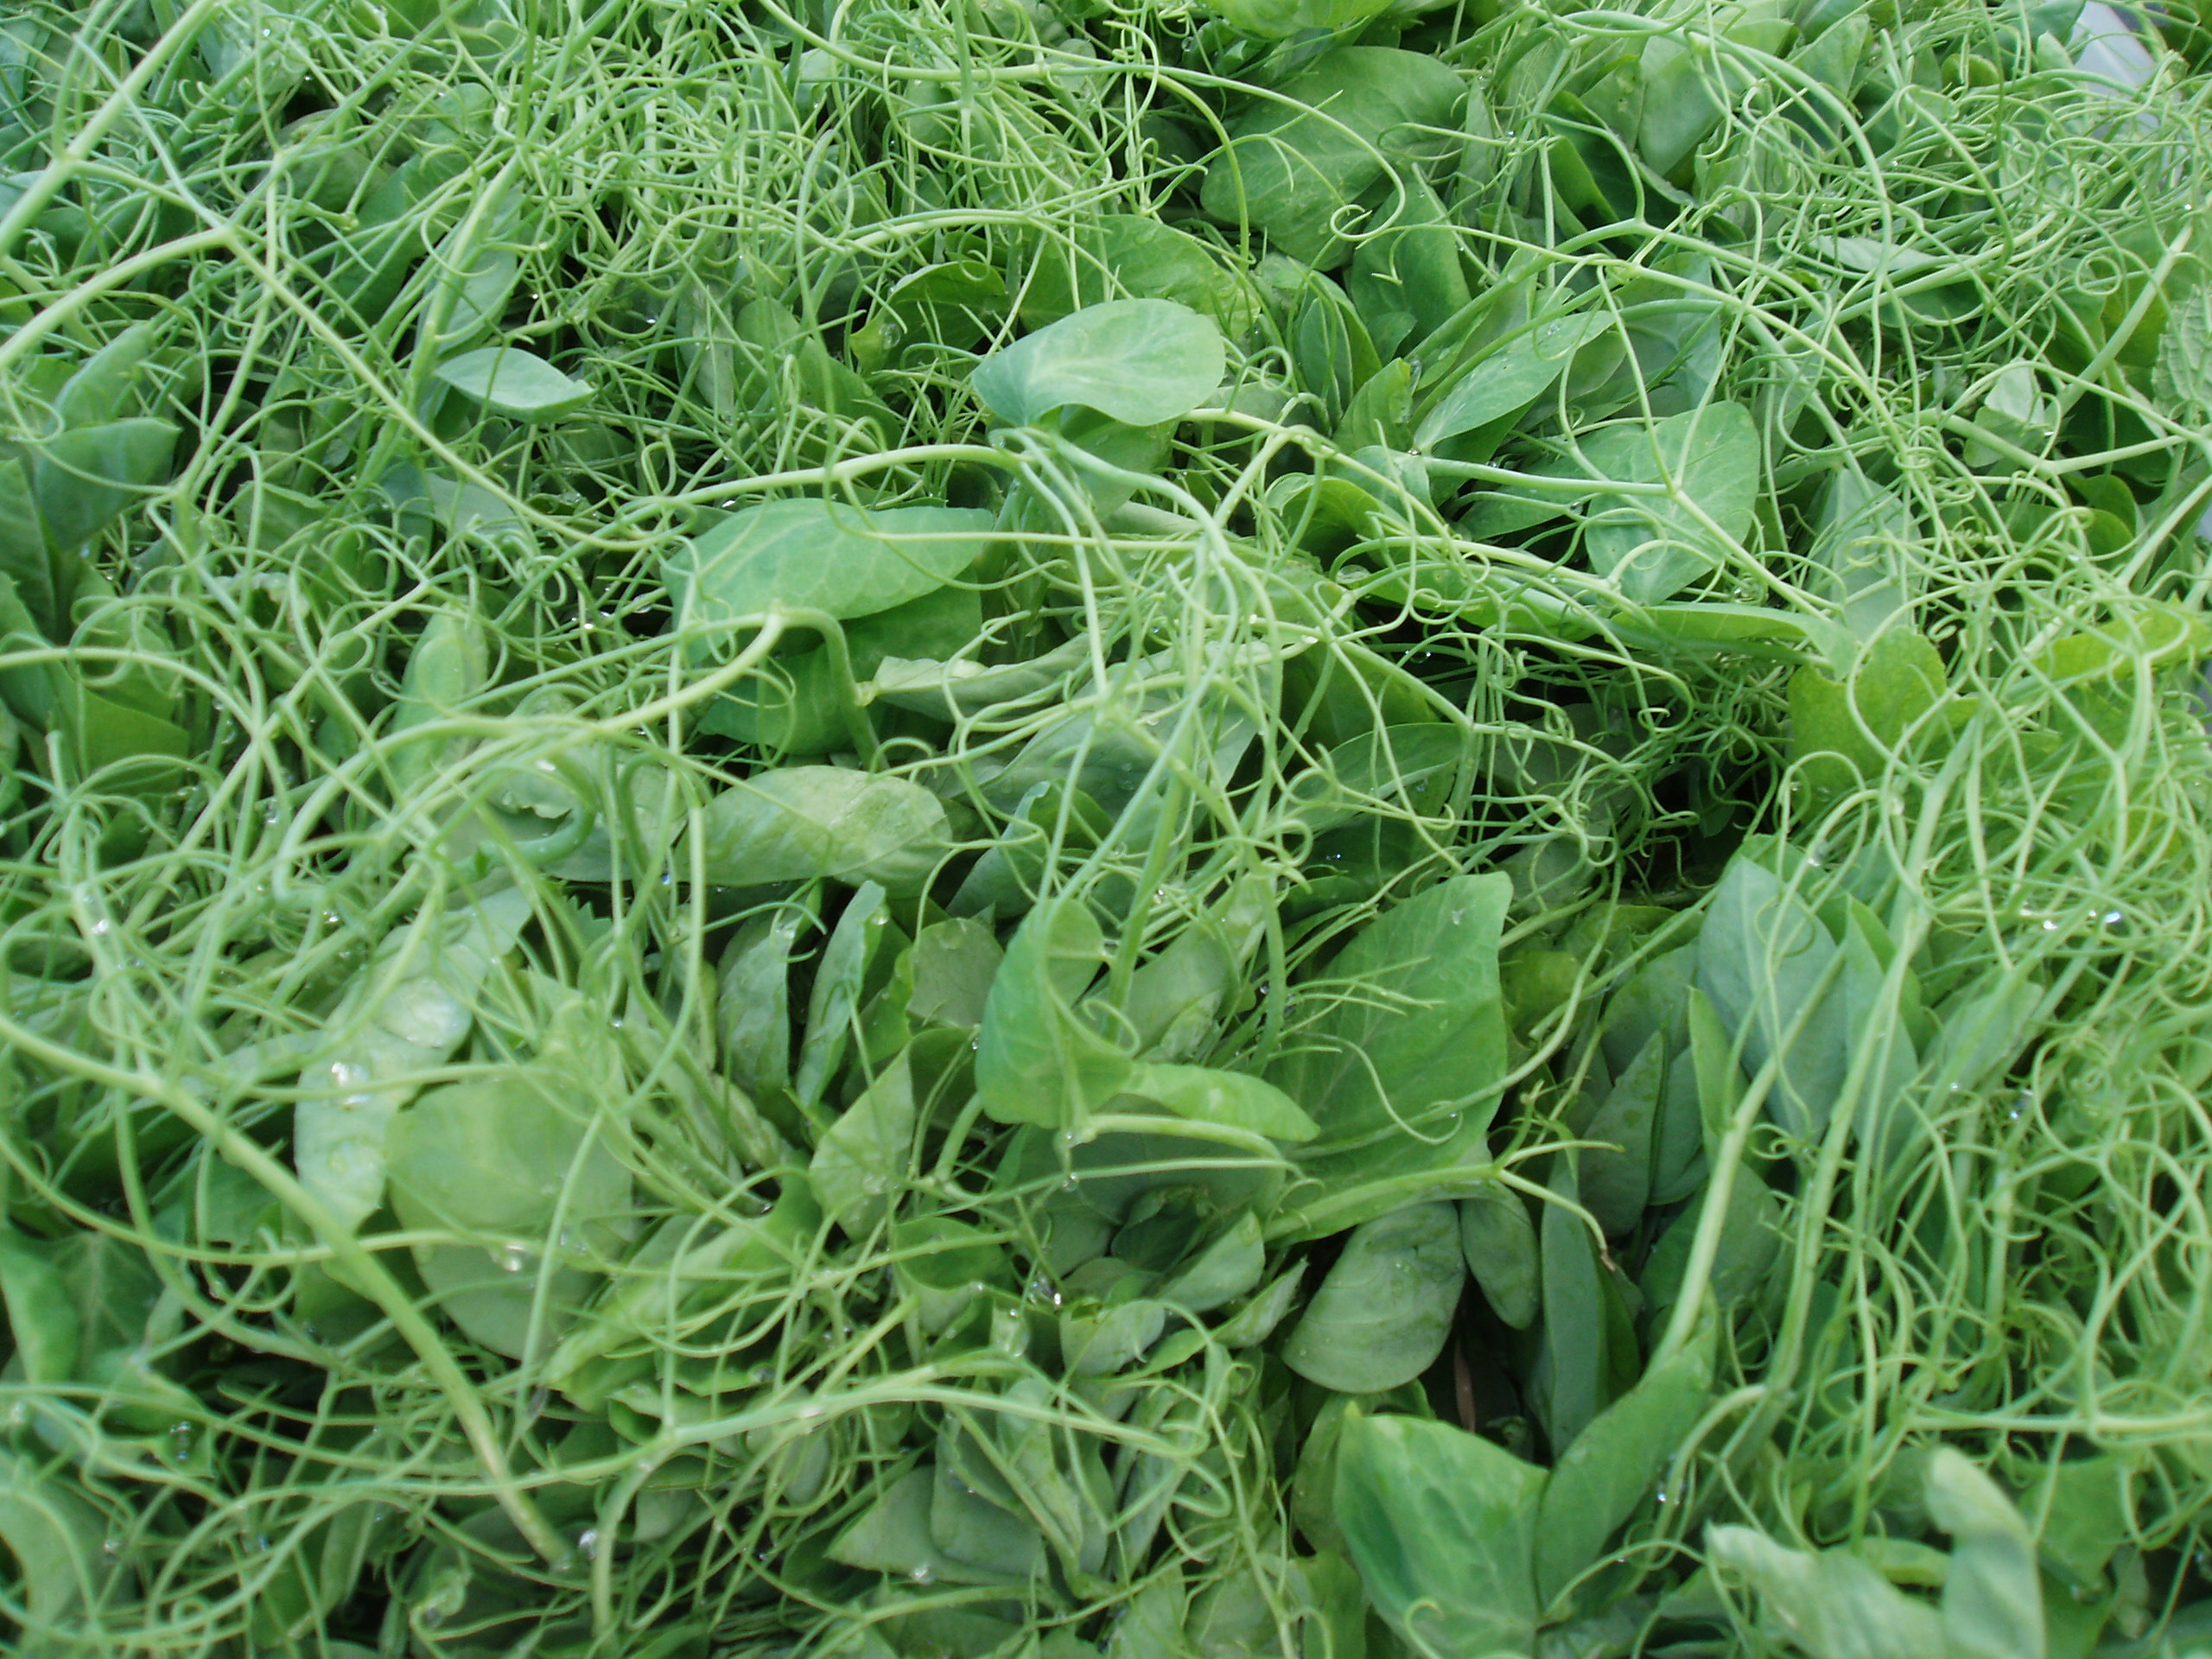 Pea Tendrils or Gorgeous Greens in 2 minutes!